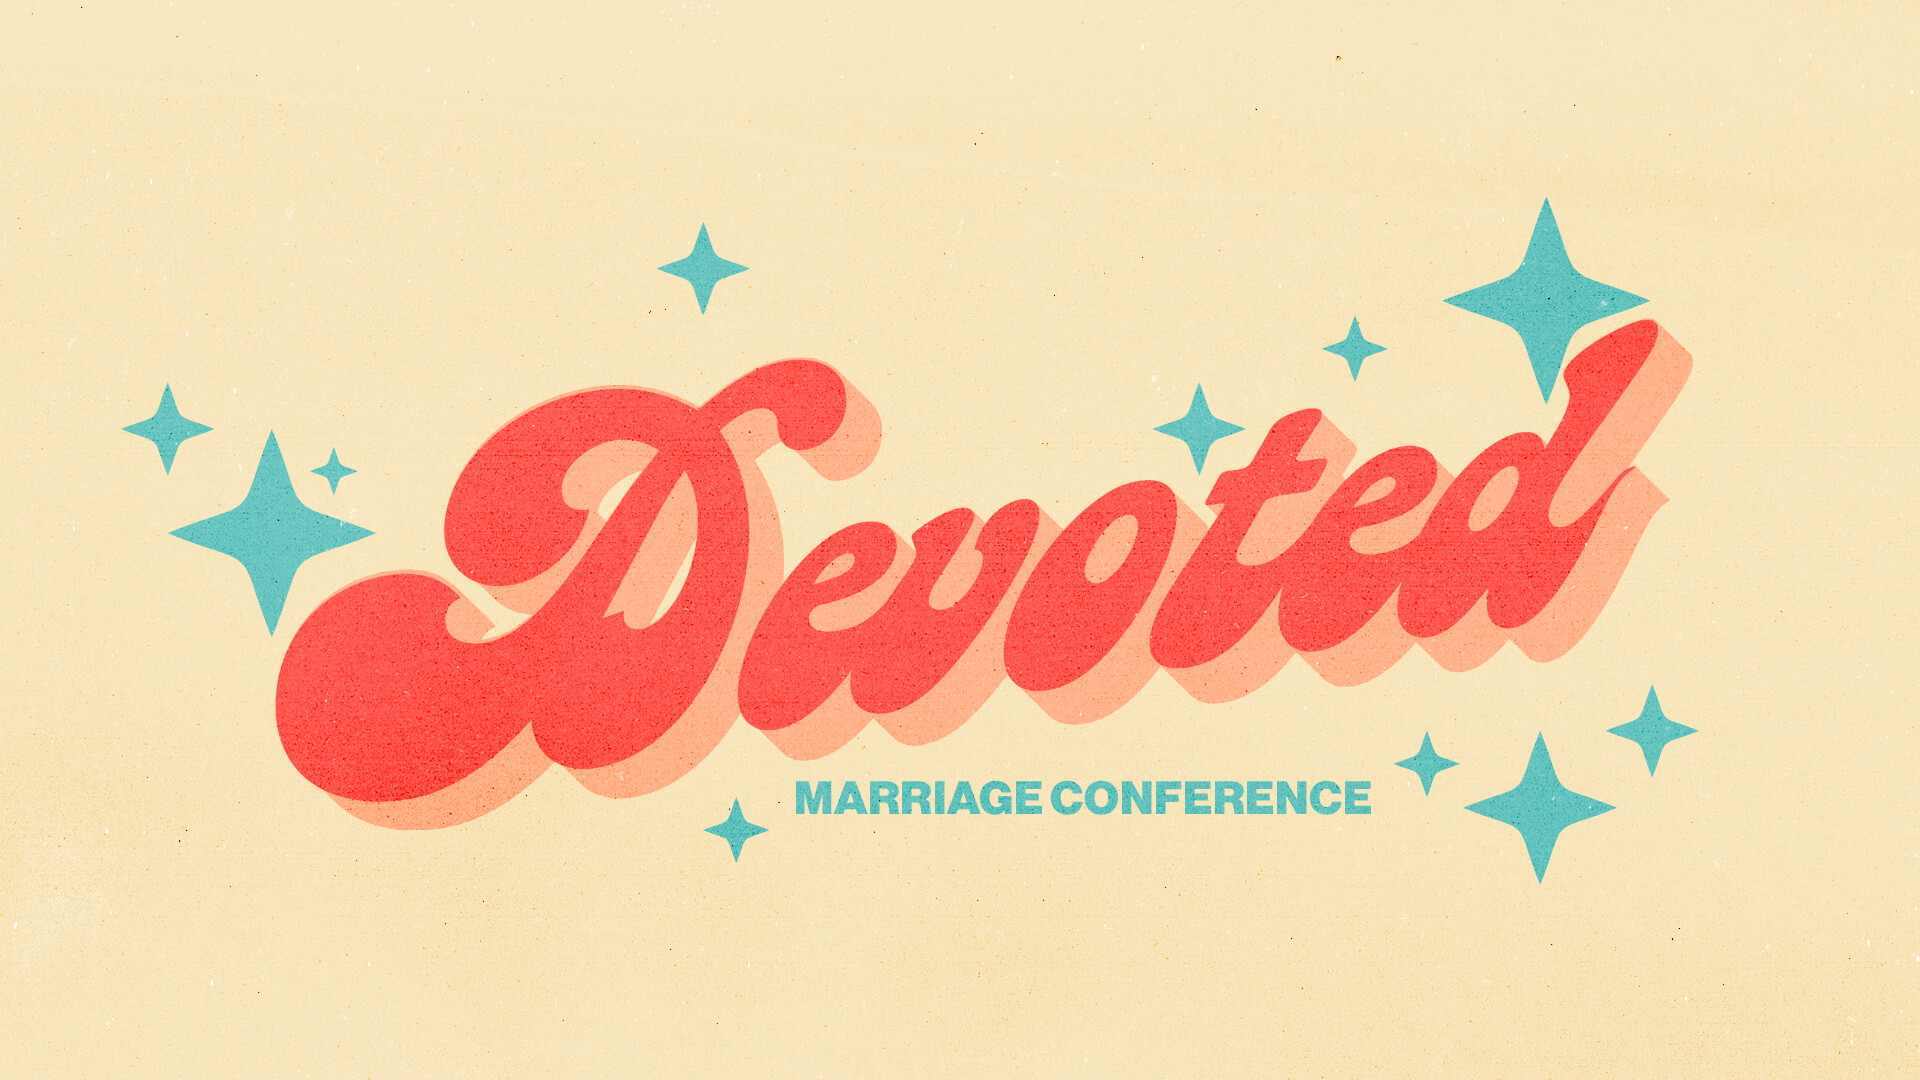 Devoted Marriage Conference Hd Title Slide 2 | Remix Church Media | Editable Design Templates And Resources Made For The Church.